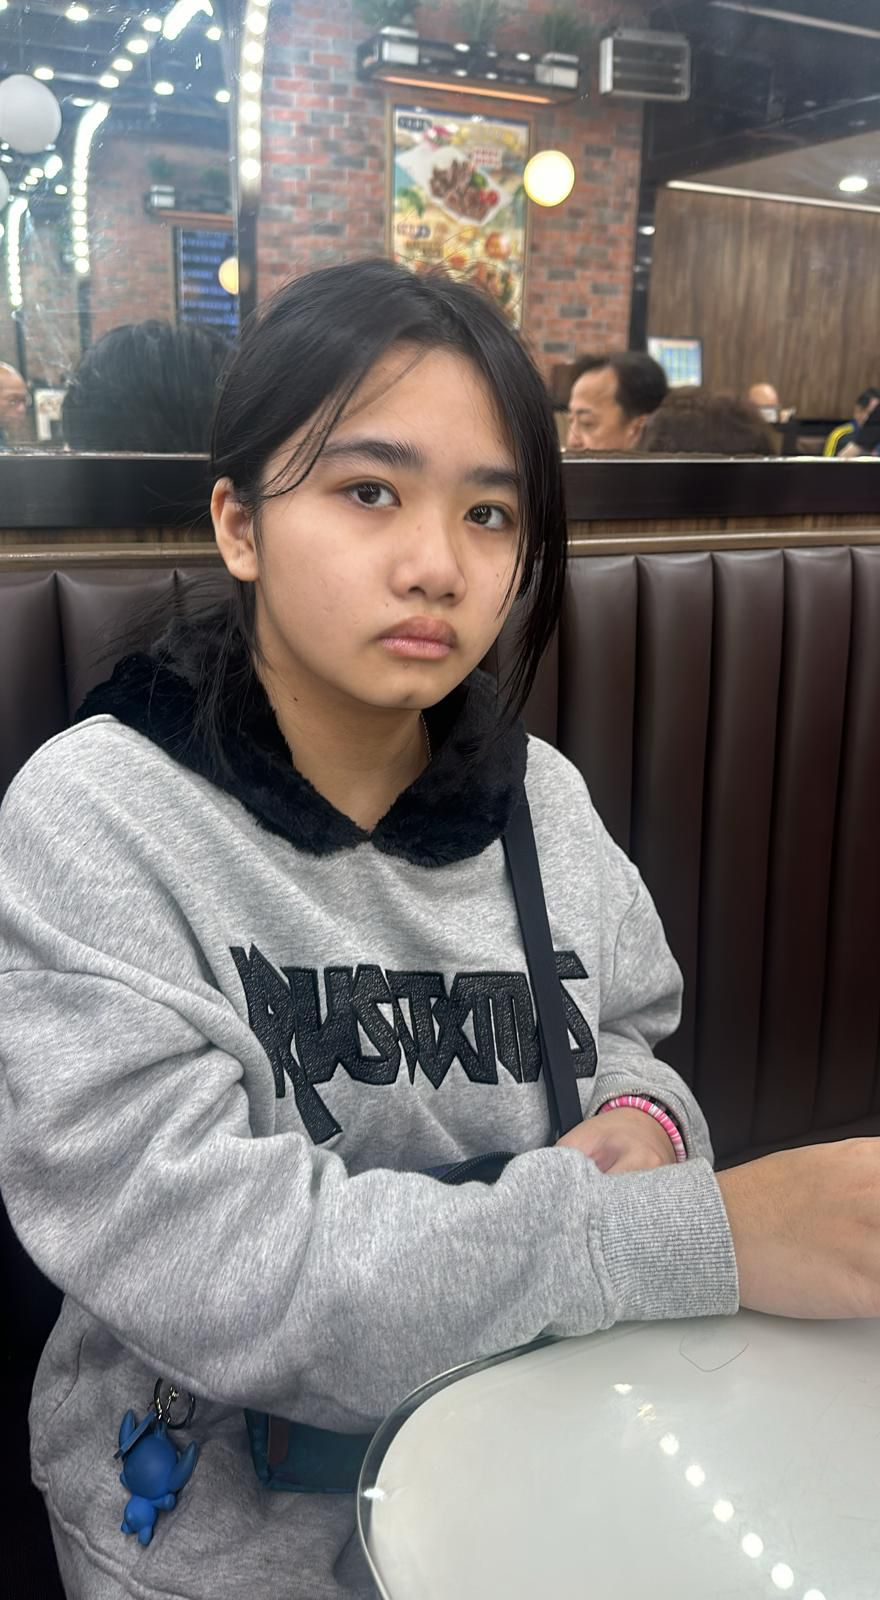 Chu Yee-man, aged 14, is about 1.5 metres tall, 59 kilograms in weight and of fat build. She has a round face with yellow complexion and long straight black hair. She was last seen wearing a white shirt, black sports jacket, black trousers and white sports shoes.